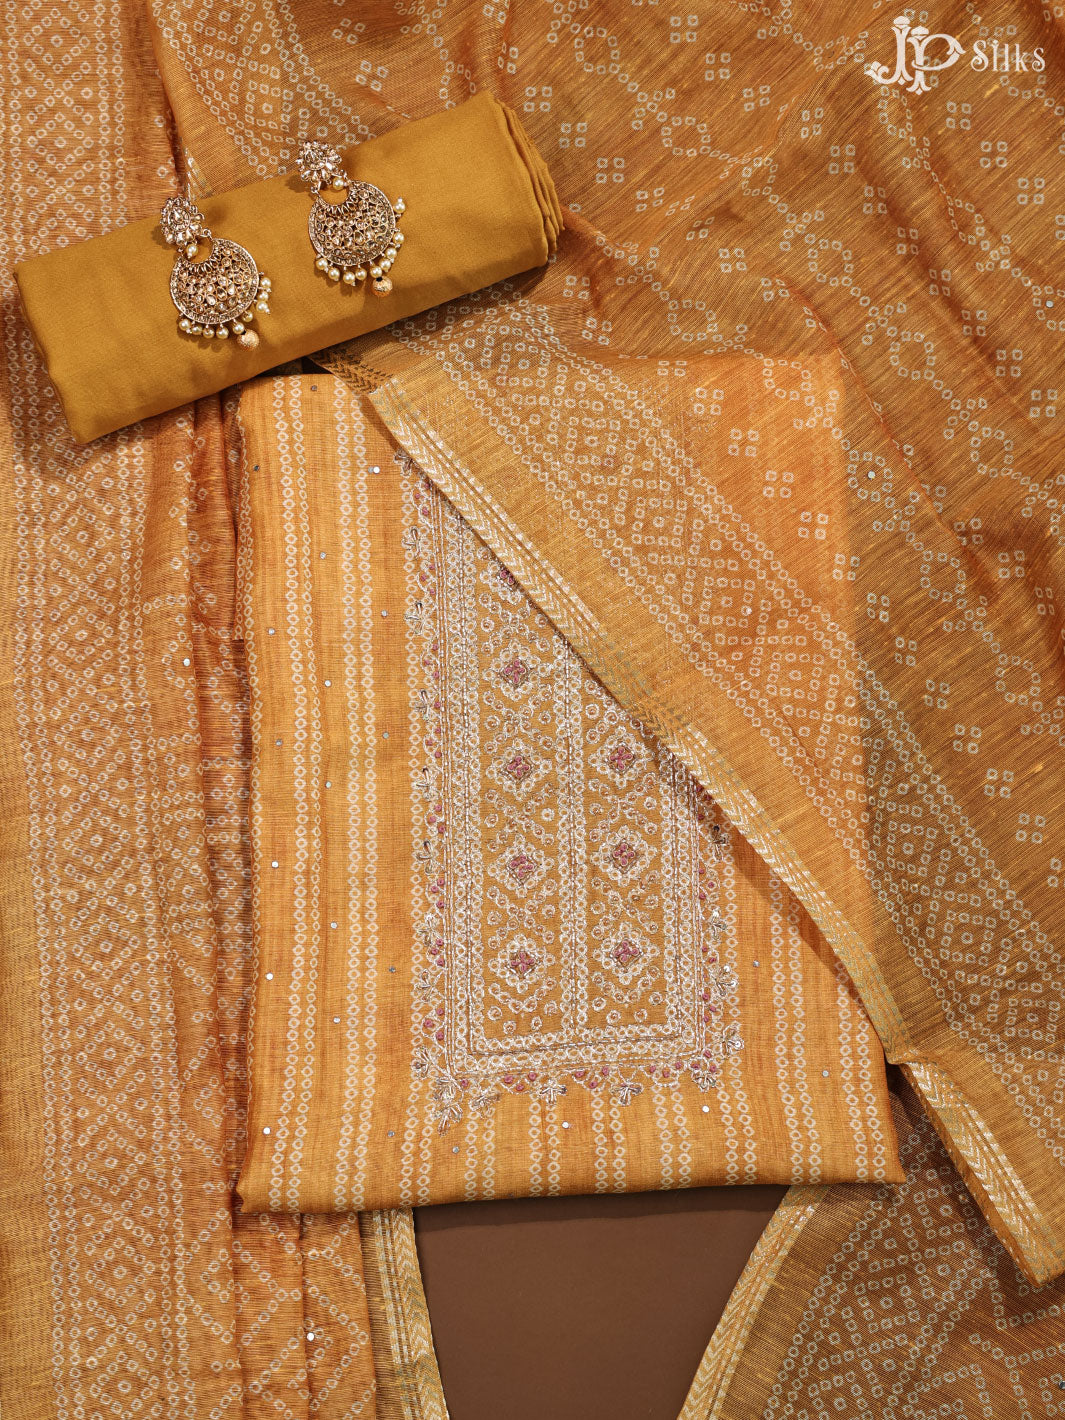 Yellow Tussar Unstiched Chudidhar Material - E1464 - View 1